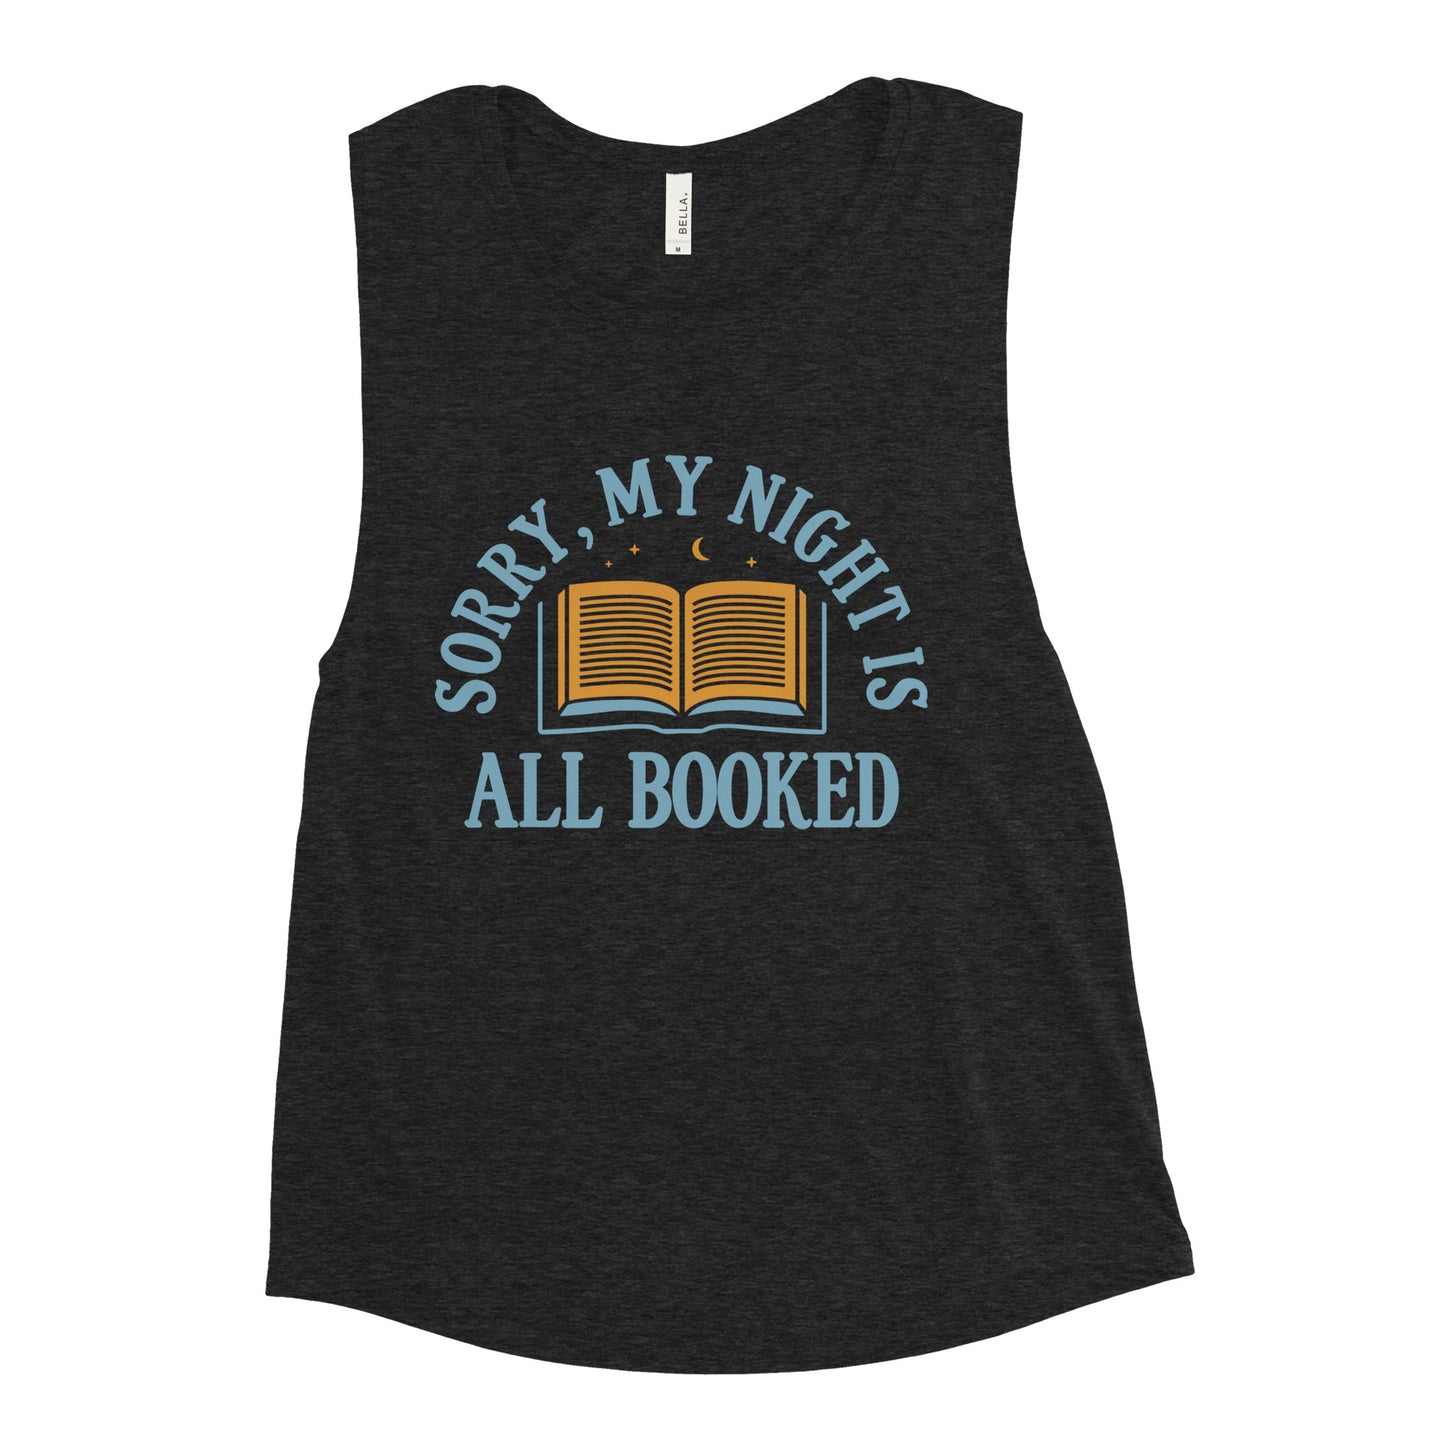 Sorry, My Night Is All Booked Women's Muscle Tank